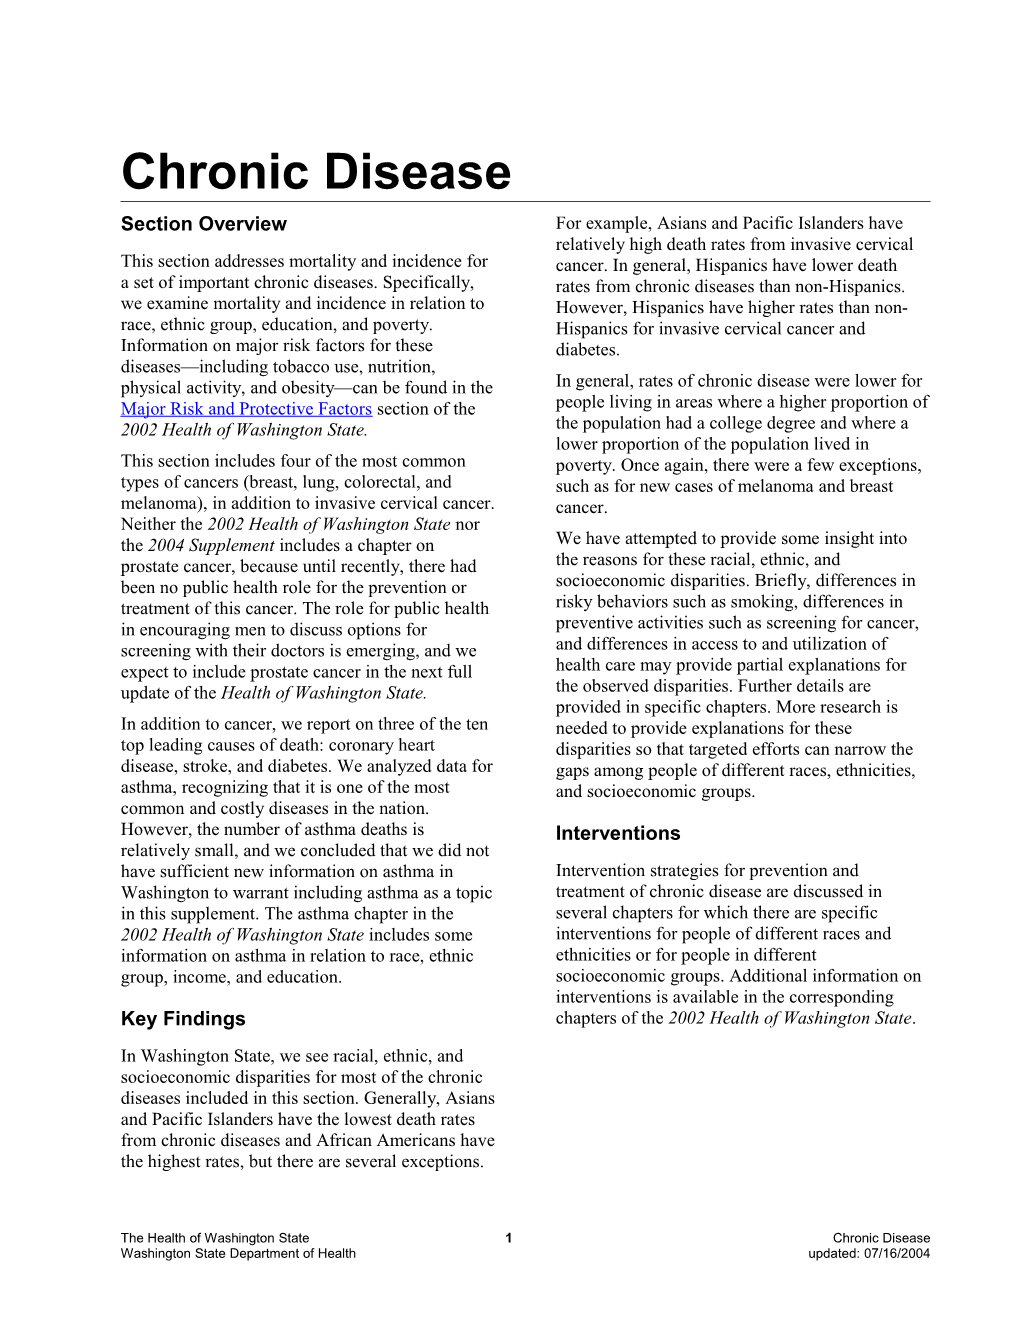 Chronic Disease - Section Overview - 2004